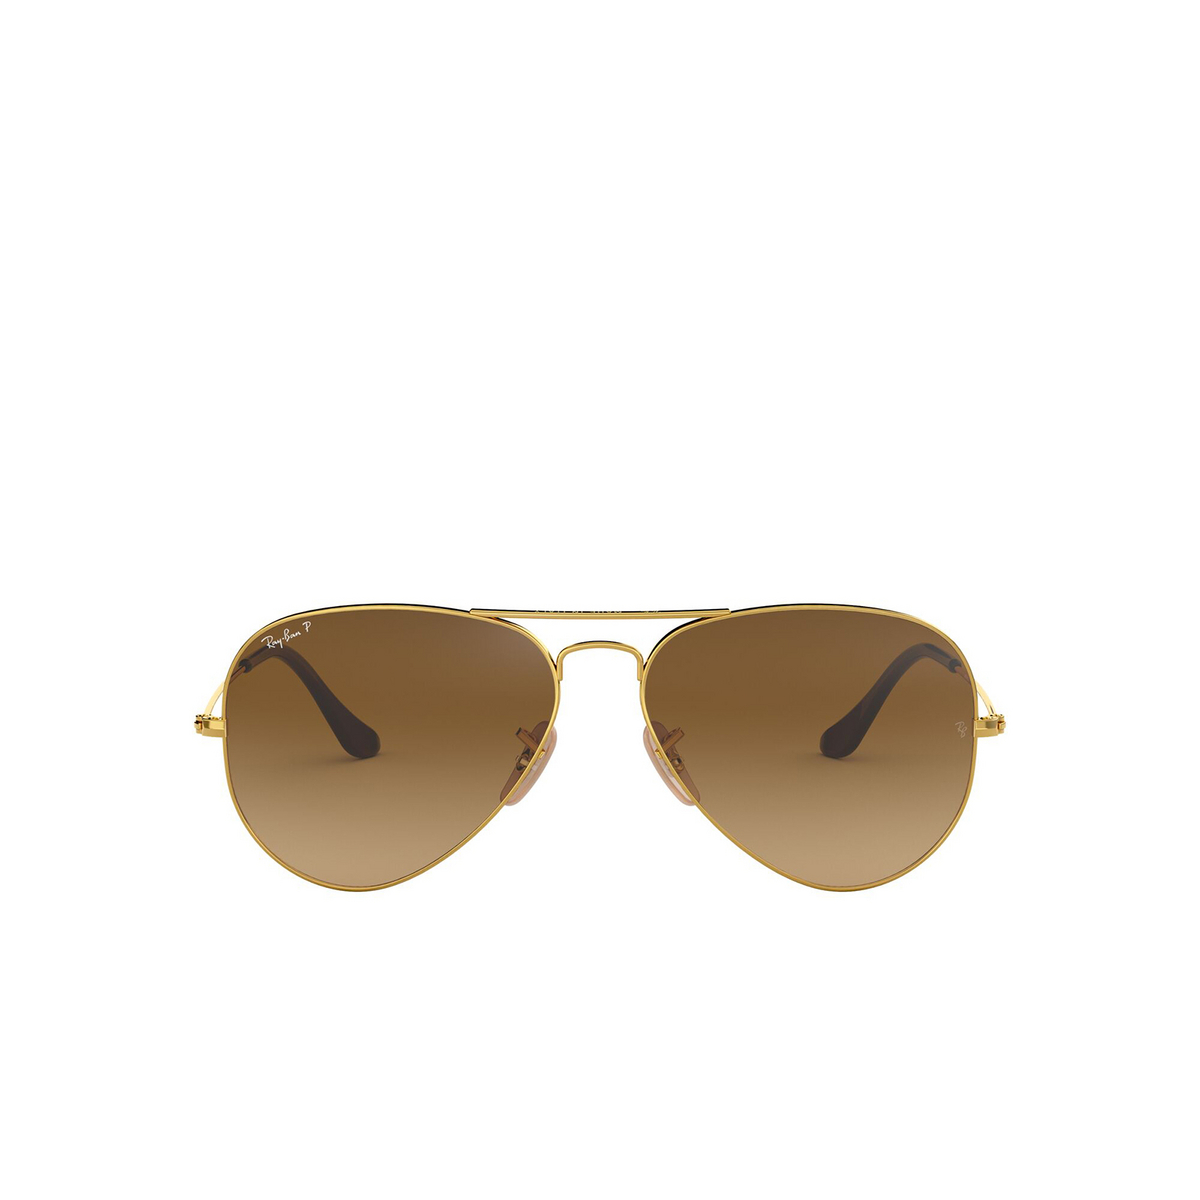 Ray-Ban AVIATOR LARGE METAL Sunglasses 001/M2 Gold - front view